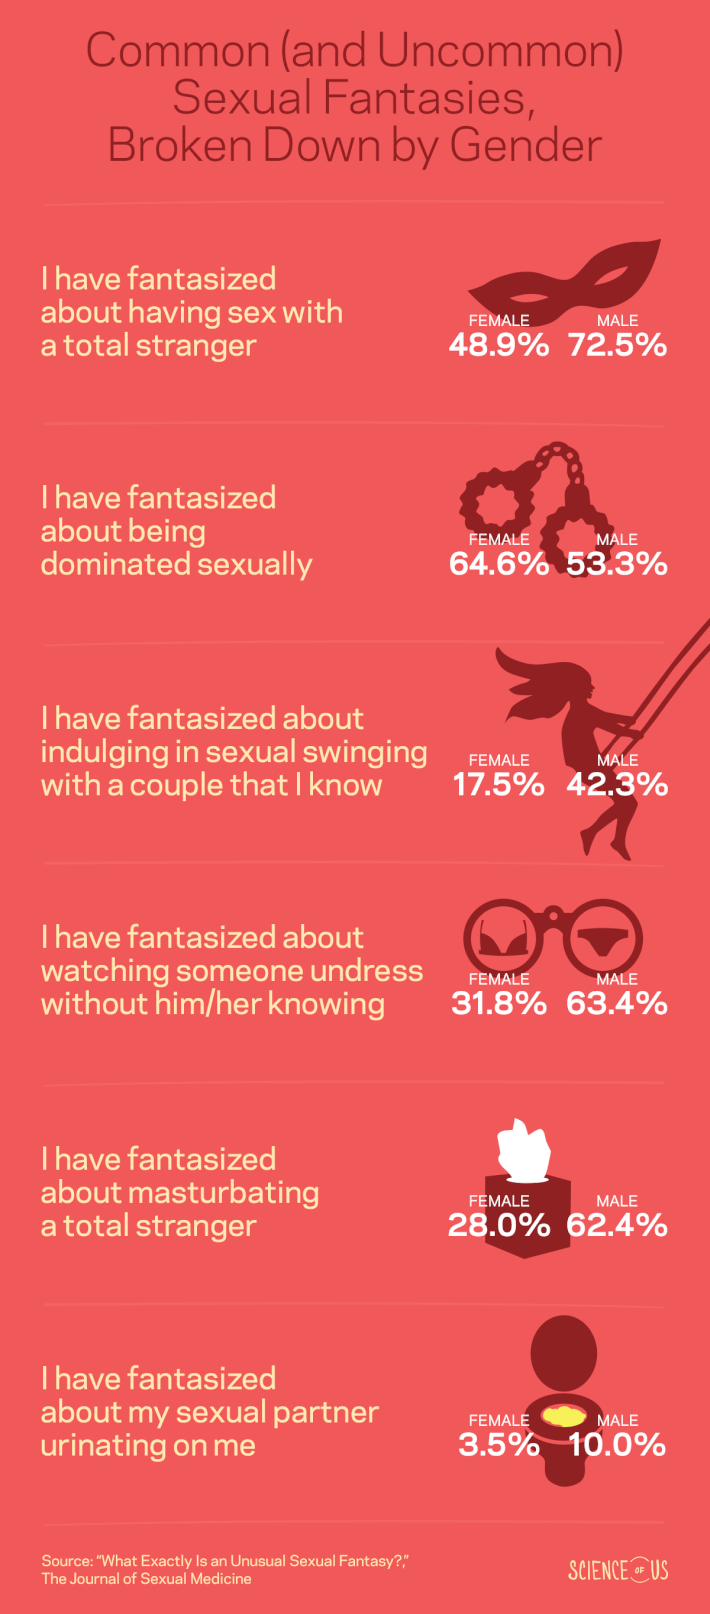 How Common Certain Sex Fantasies Are, by Gender